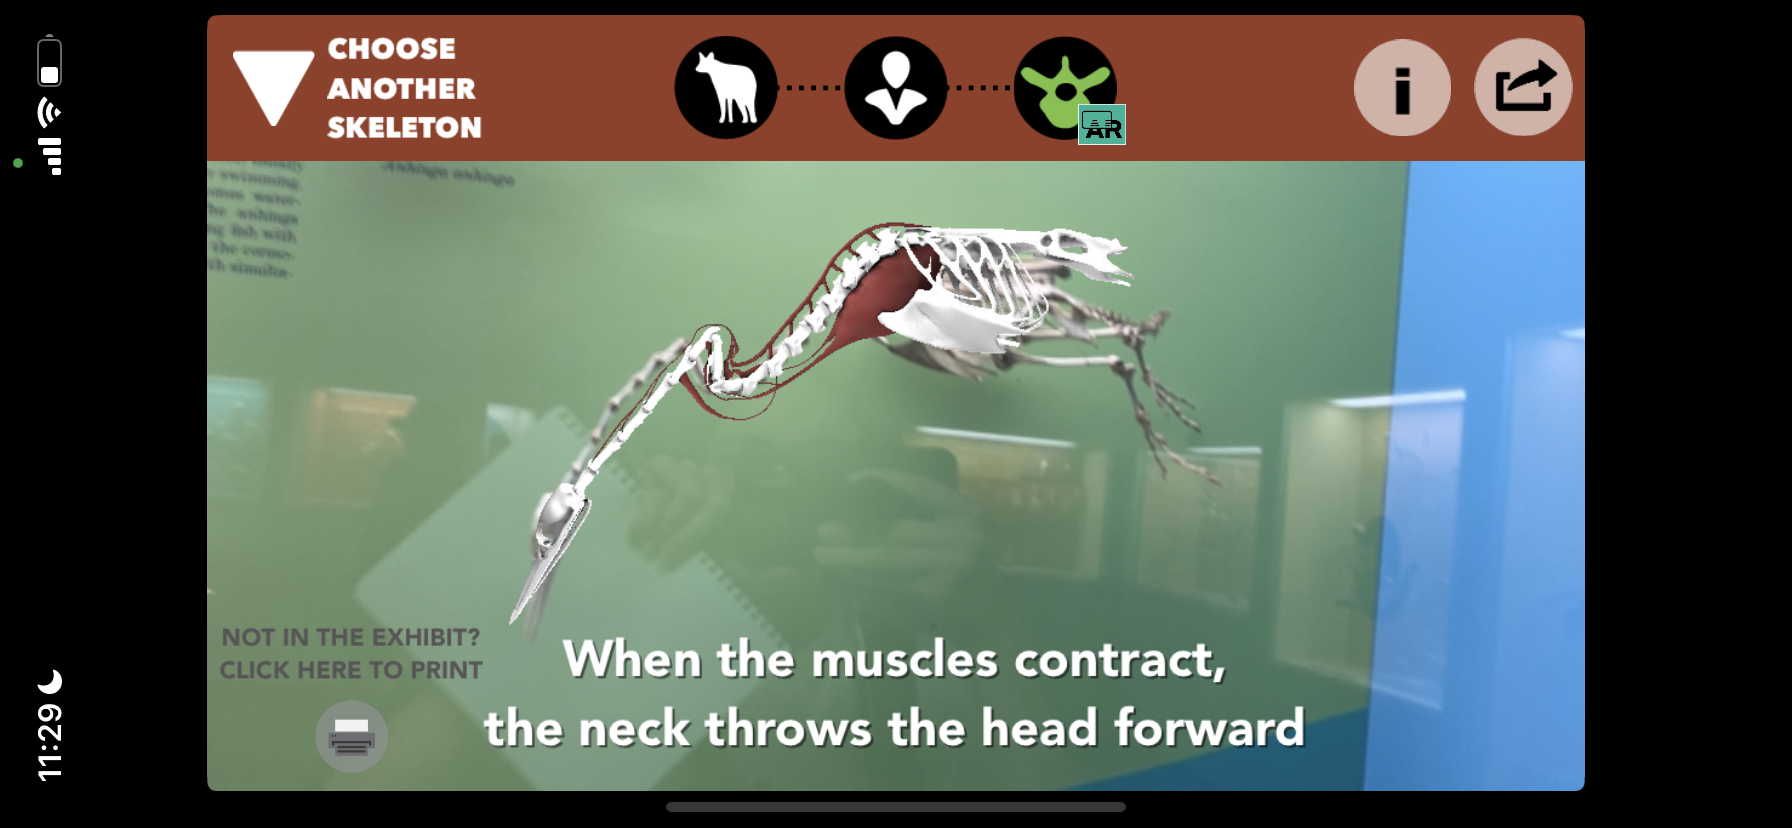 A screenshot of the interface when viewing the anhinga skeleton with the *Skin & Bones* app on an iPhone. There is an animation of the anhinga skeleton with some of the neck and chest muscles shown, all superimposed on the skeleton in the exhibit. Text underneath the animation reads “When the muscles contract, the neck throws the head forward.” Along the top of the interface, there are several icons. There is an icon representing an animal, an icon representing a person, and an icon of a vertebra with an “AR” tag next to it. There is also an option to “Choose another skeleton,” plus “information” and “share” logos.